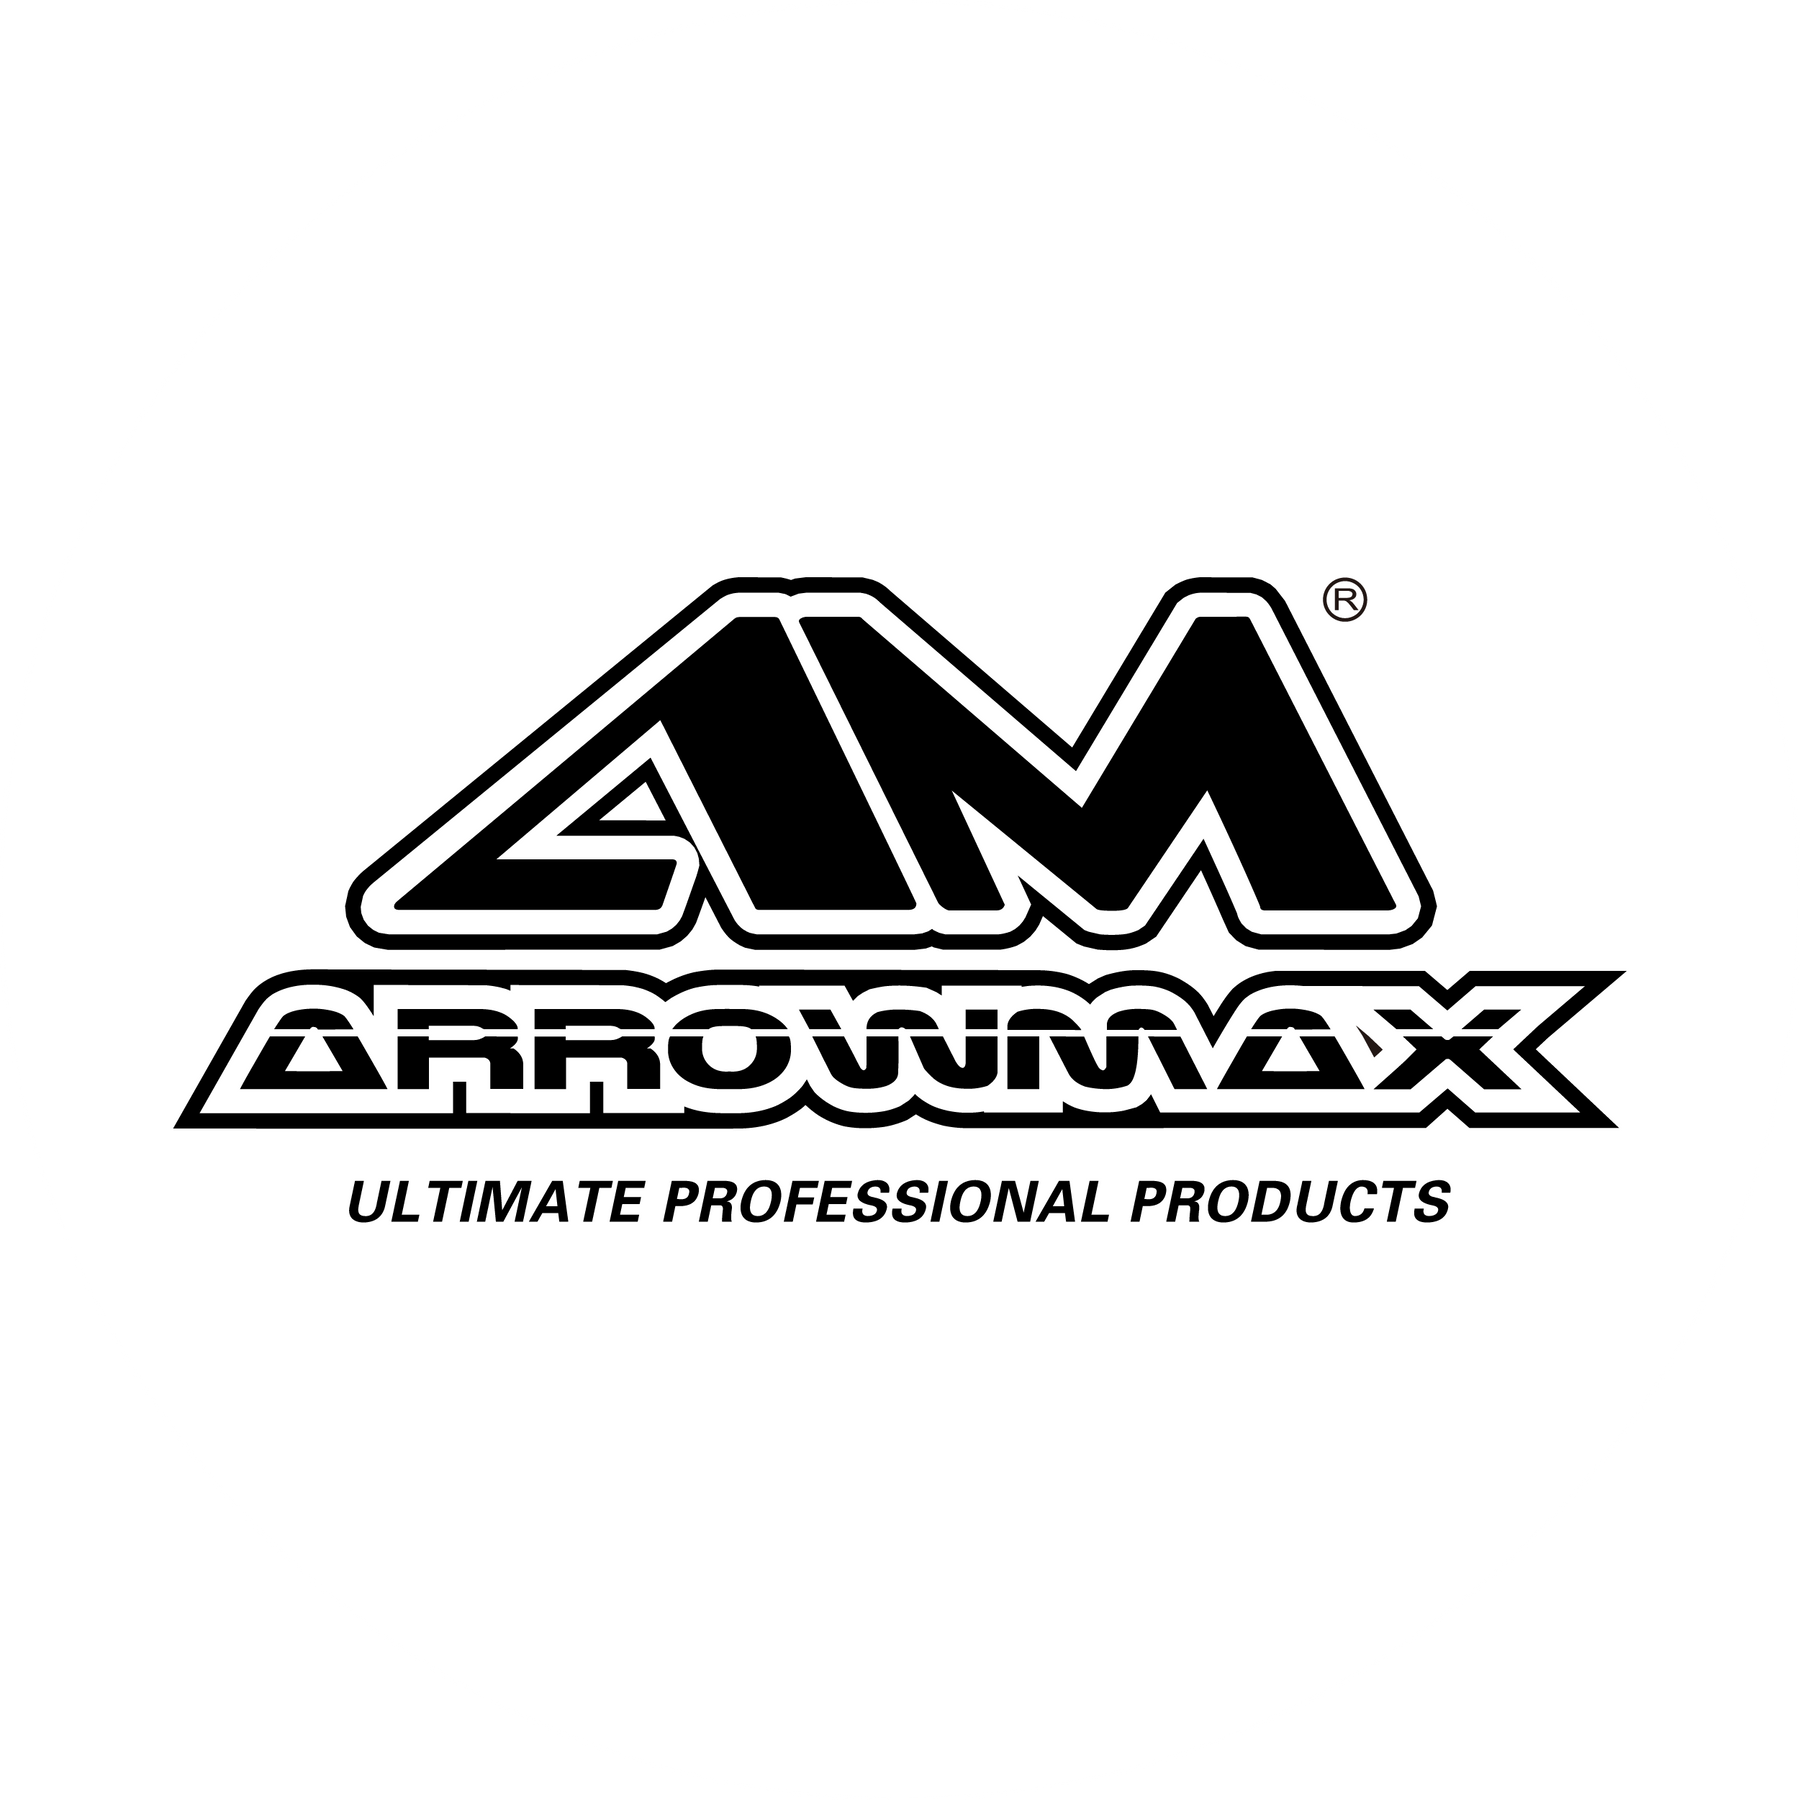 About Arrowmax